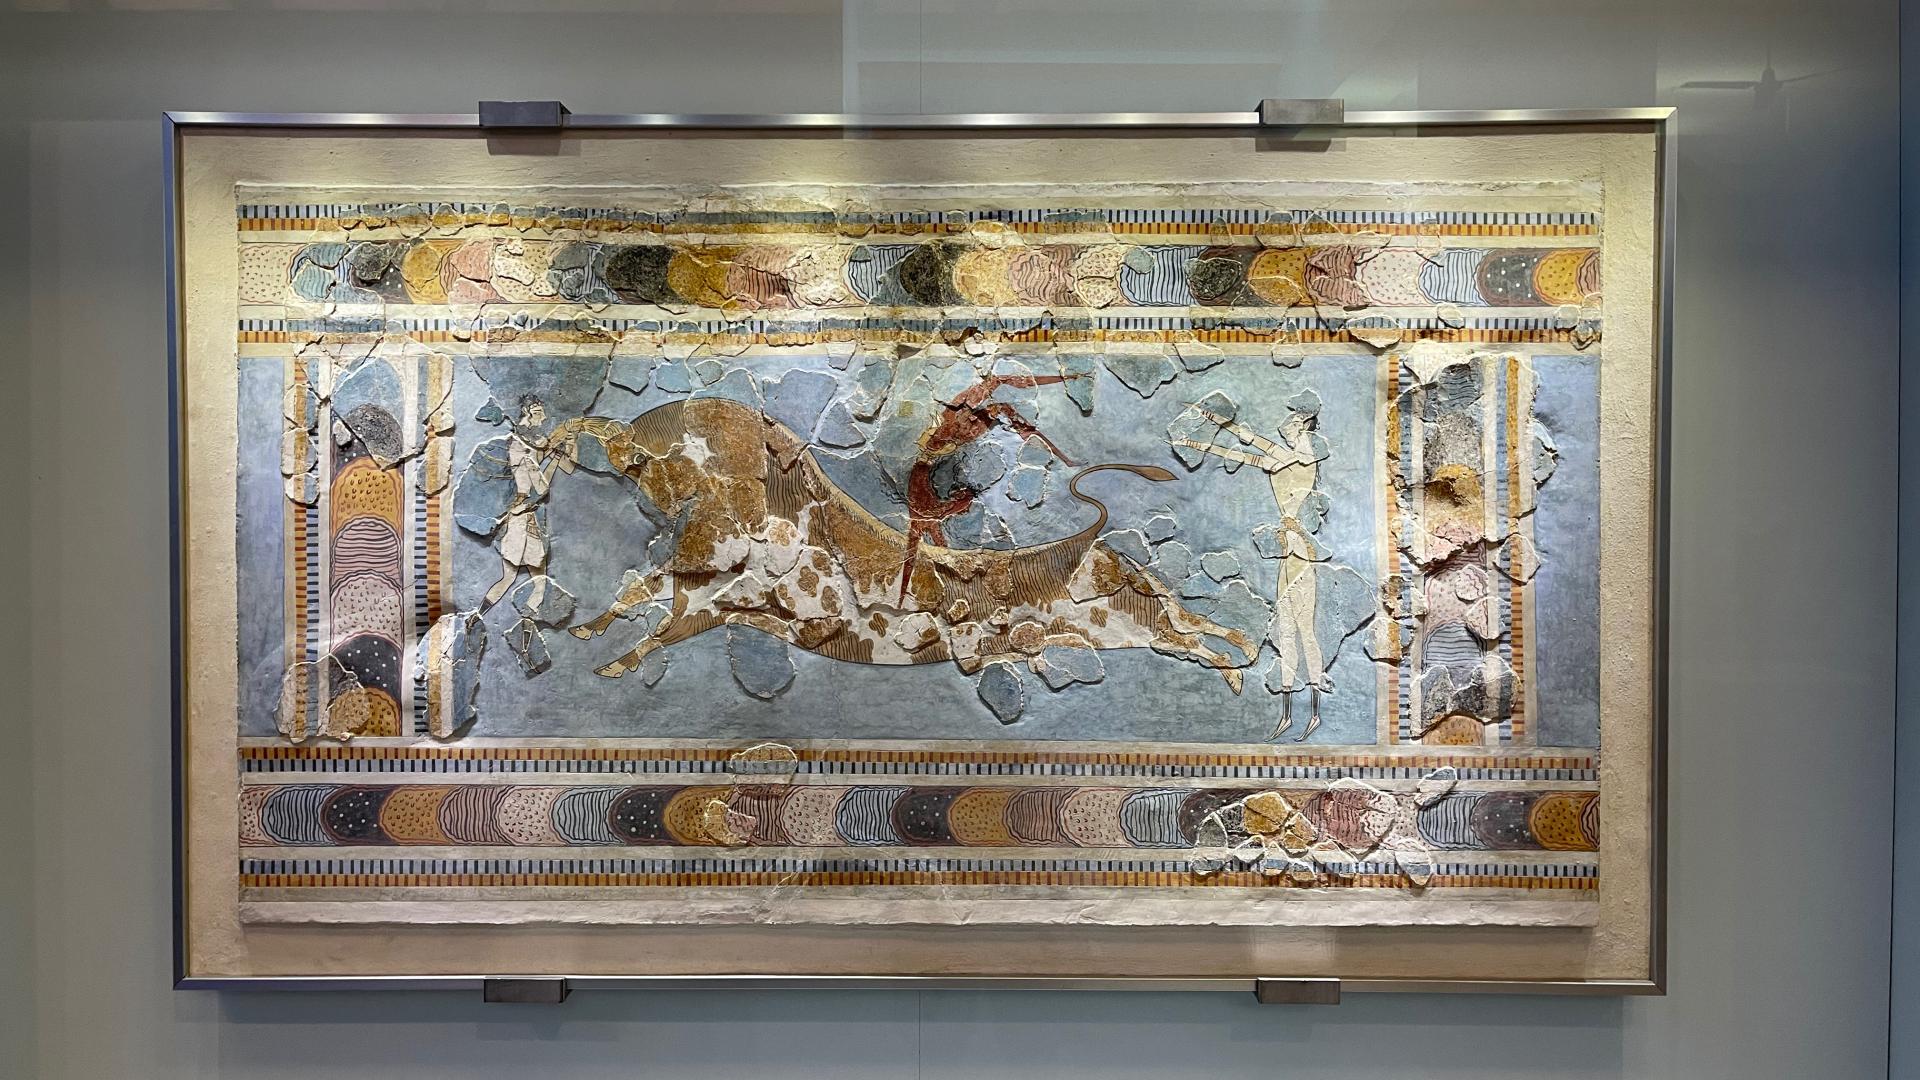 Bull leap fresco from Knossos Palace